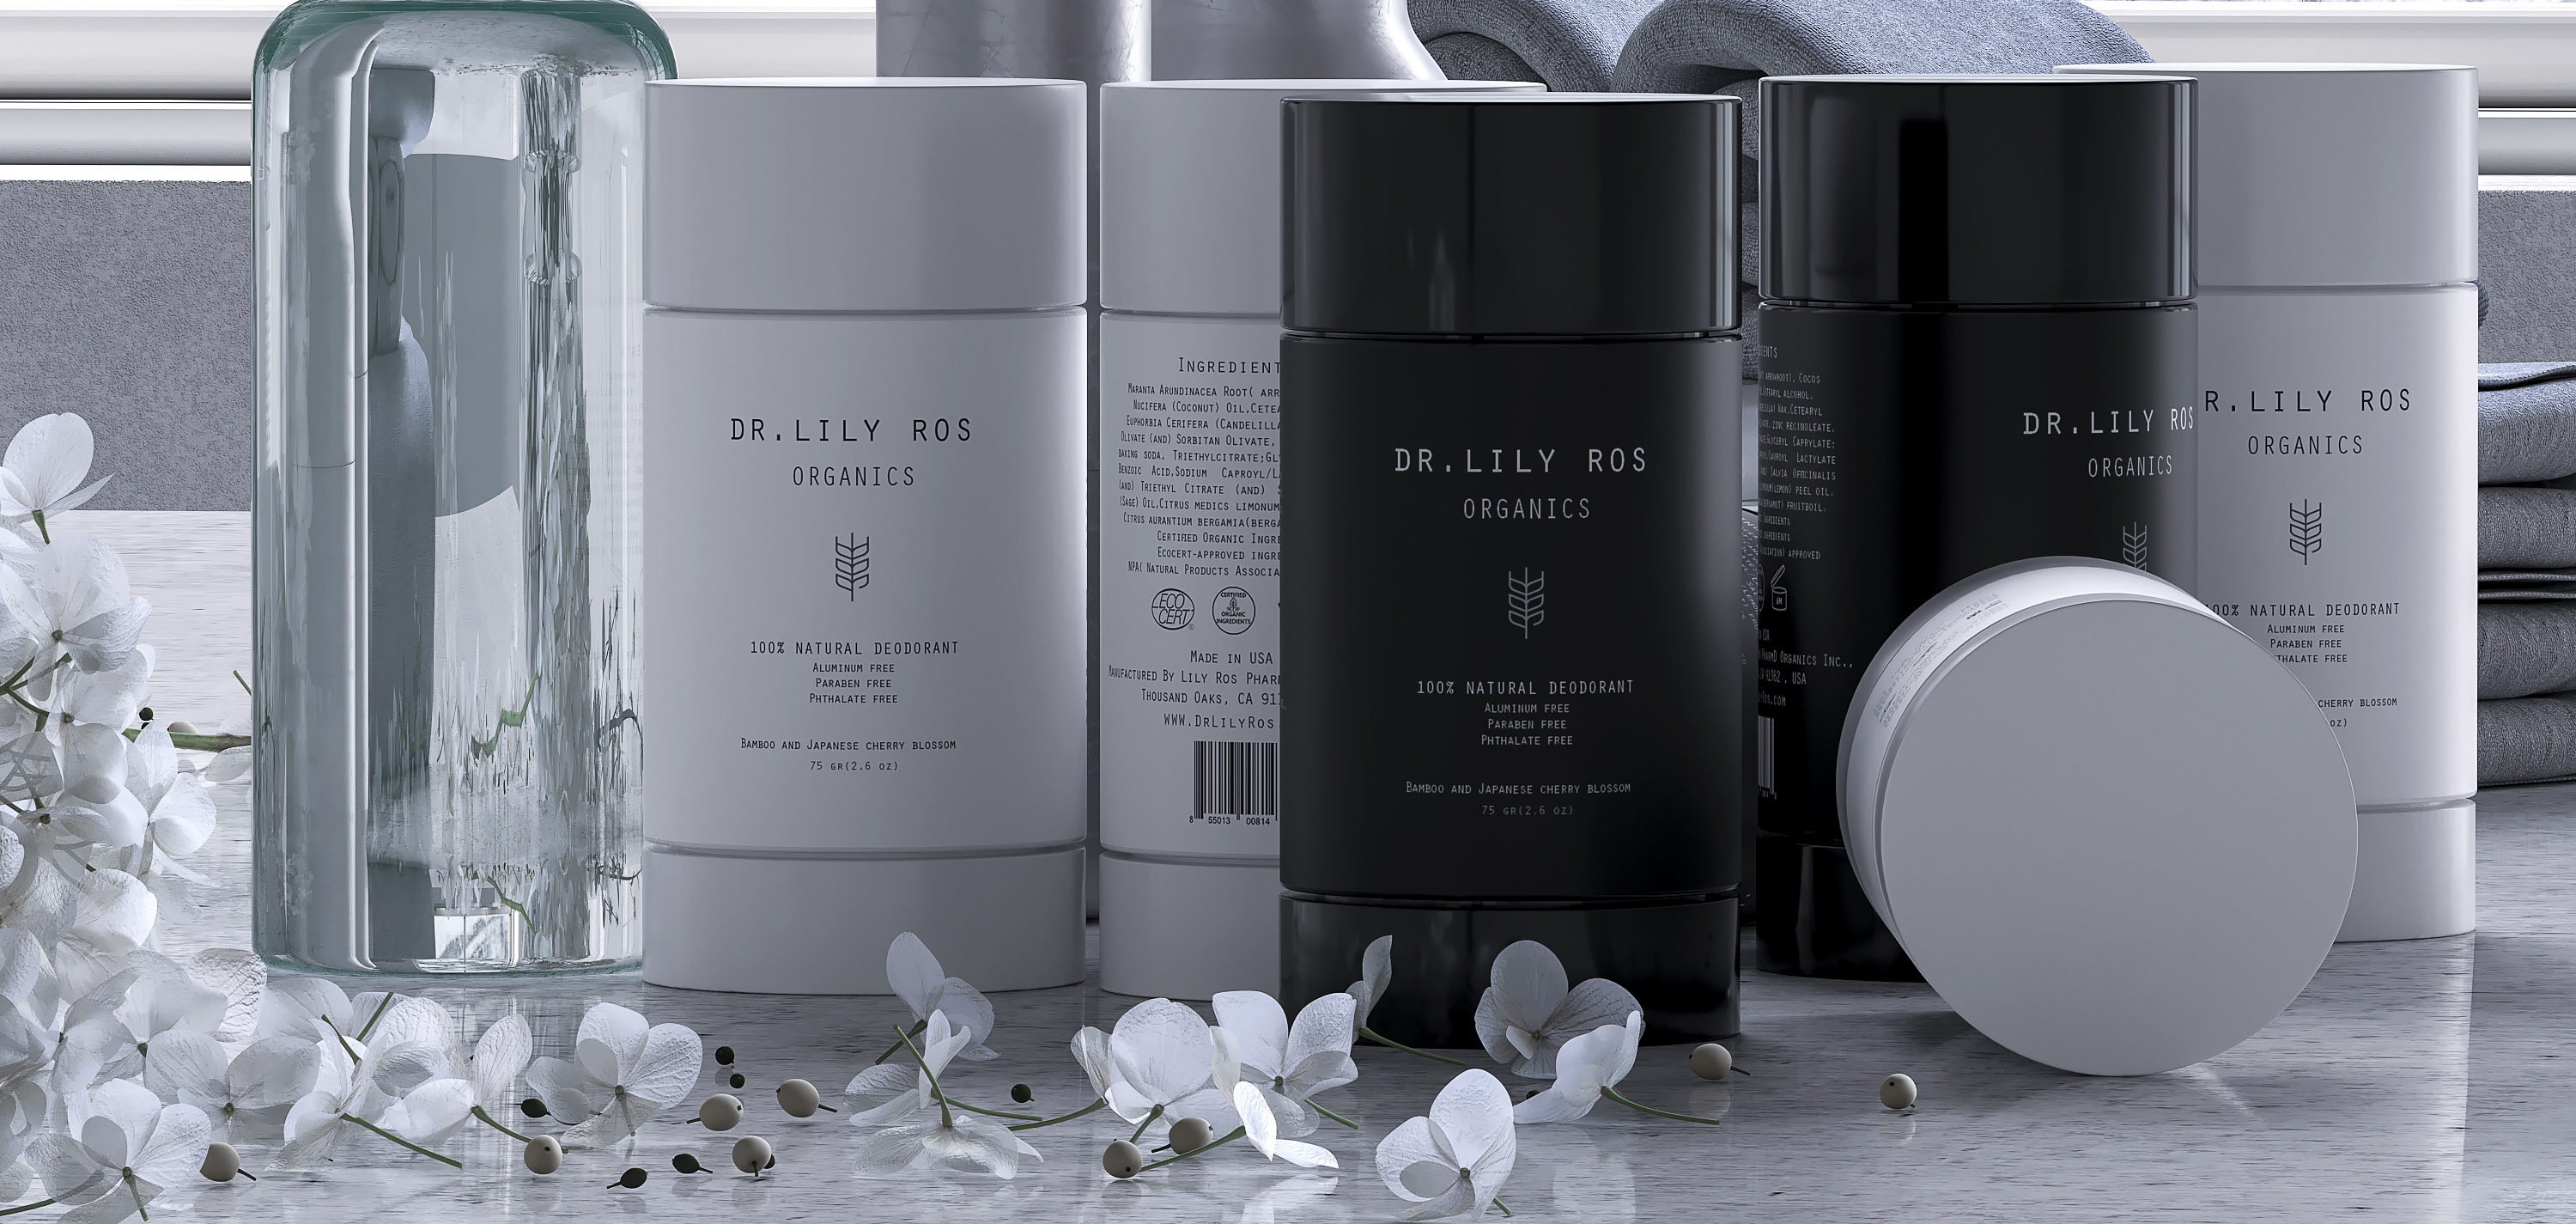 Is Dr. Lily Ros cruelty free?